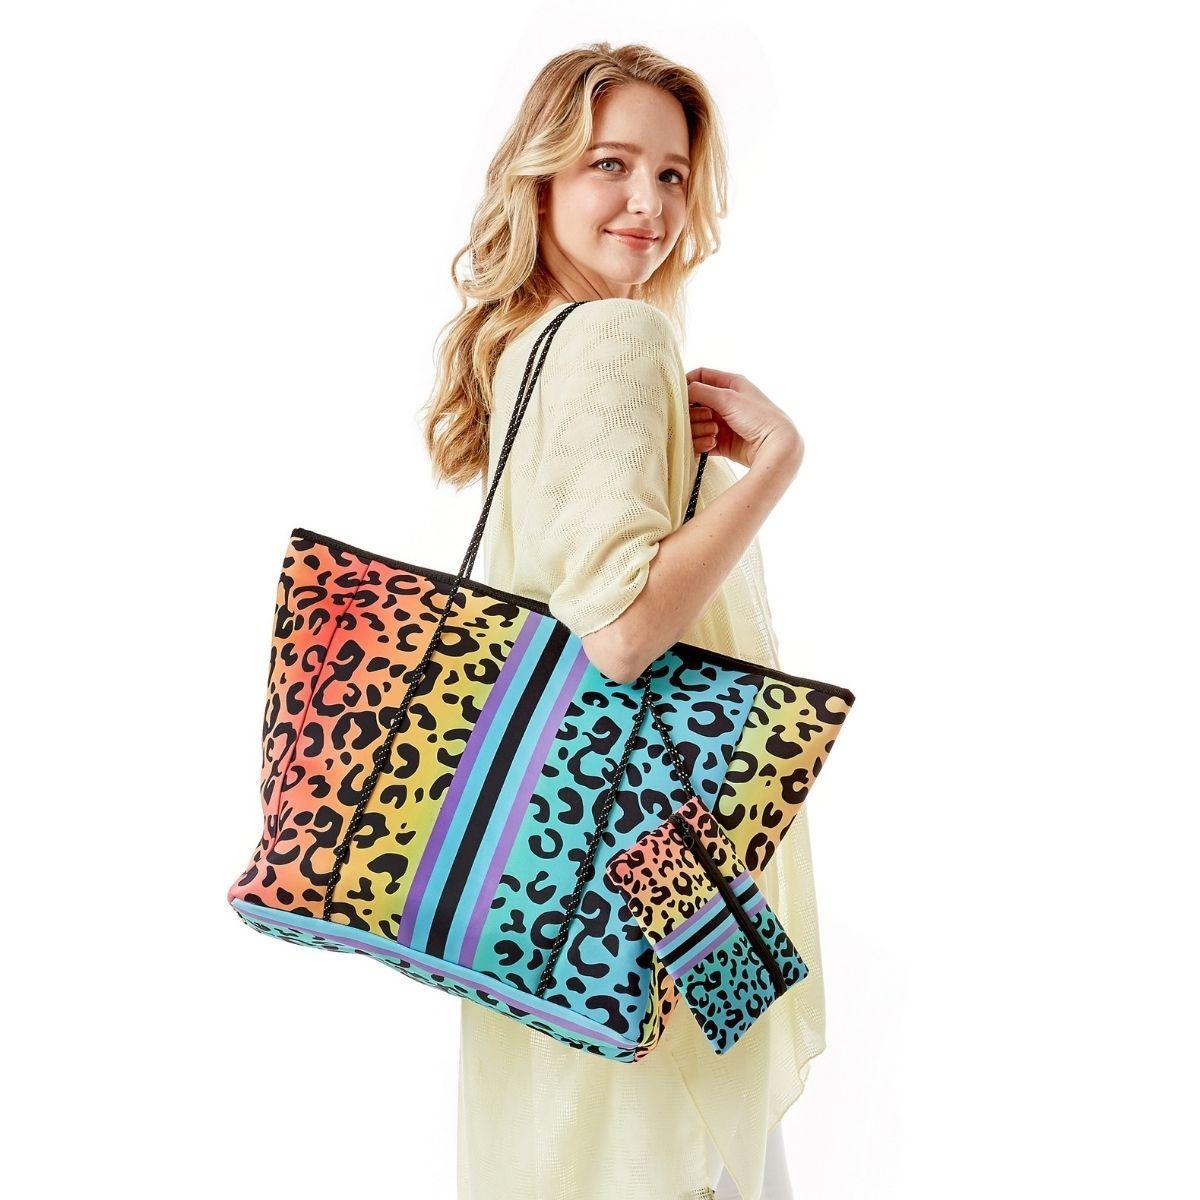 Rainbow Leopard Beach Tote Set Perfect Accessory for a Day at the Beach